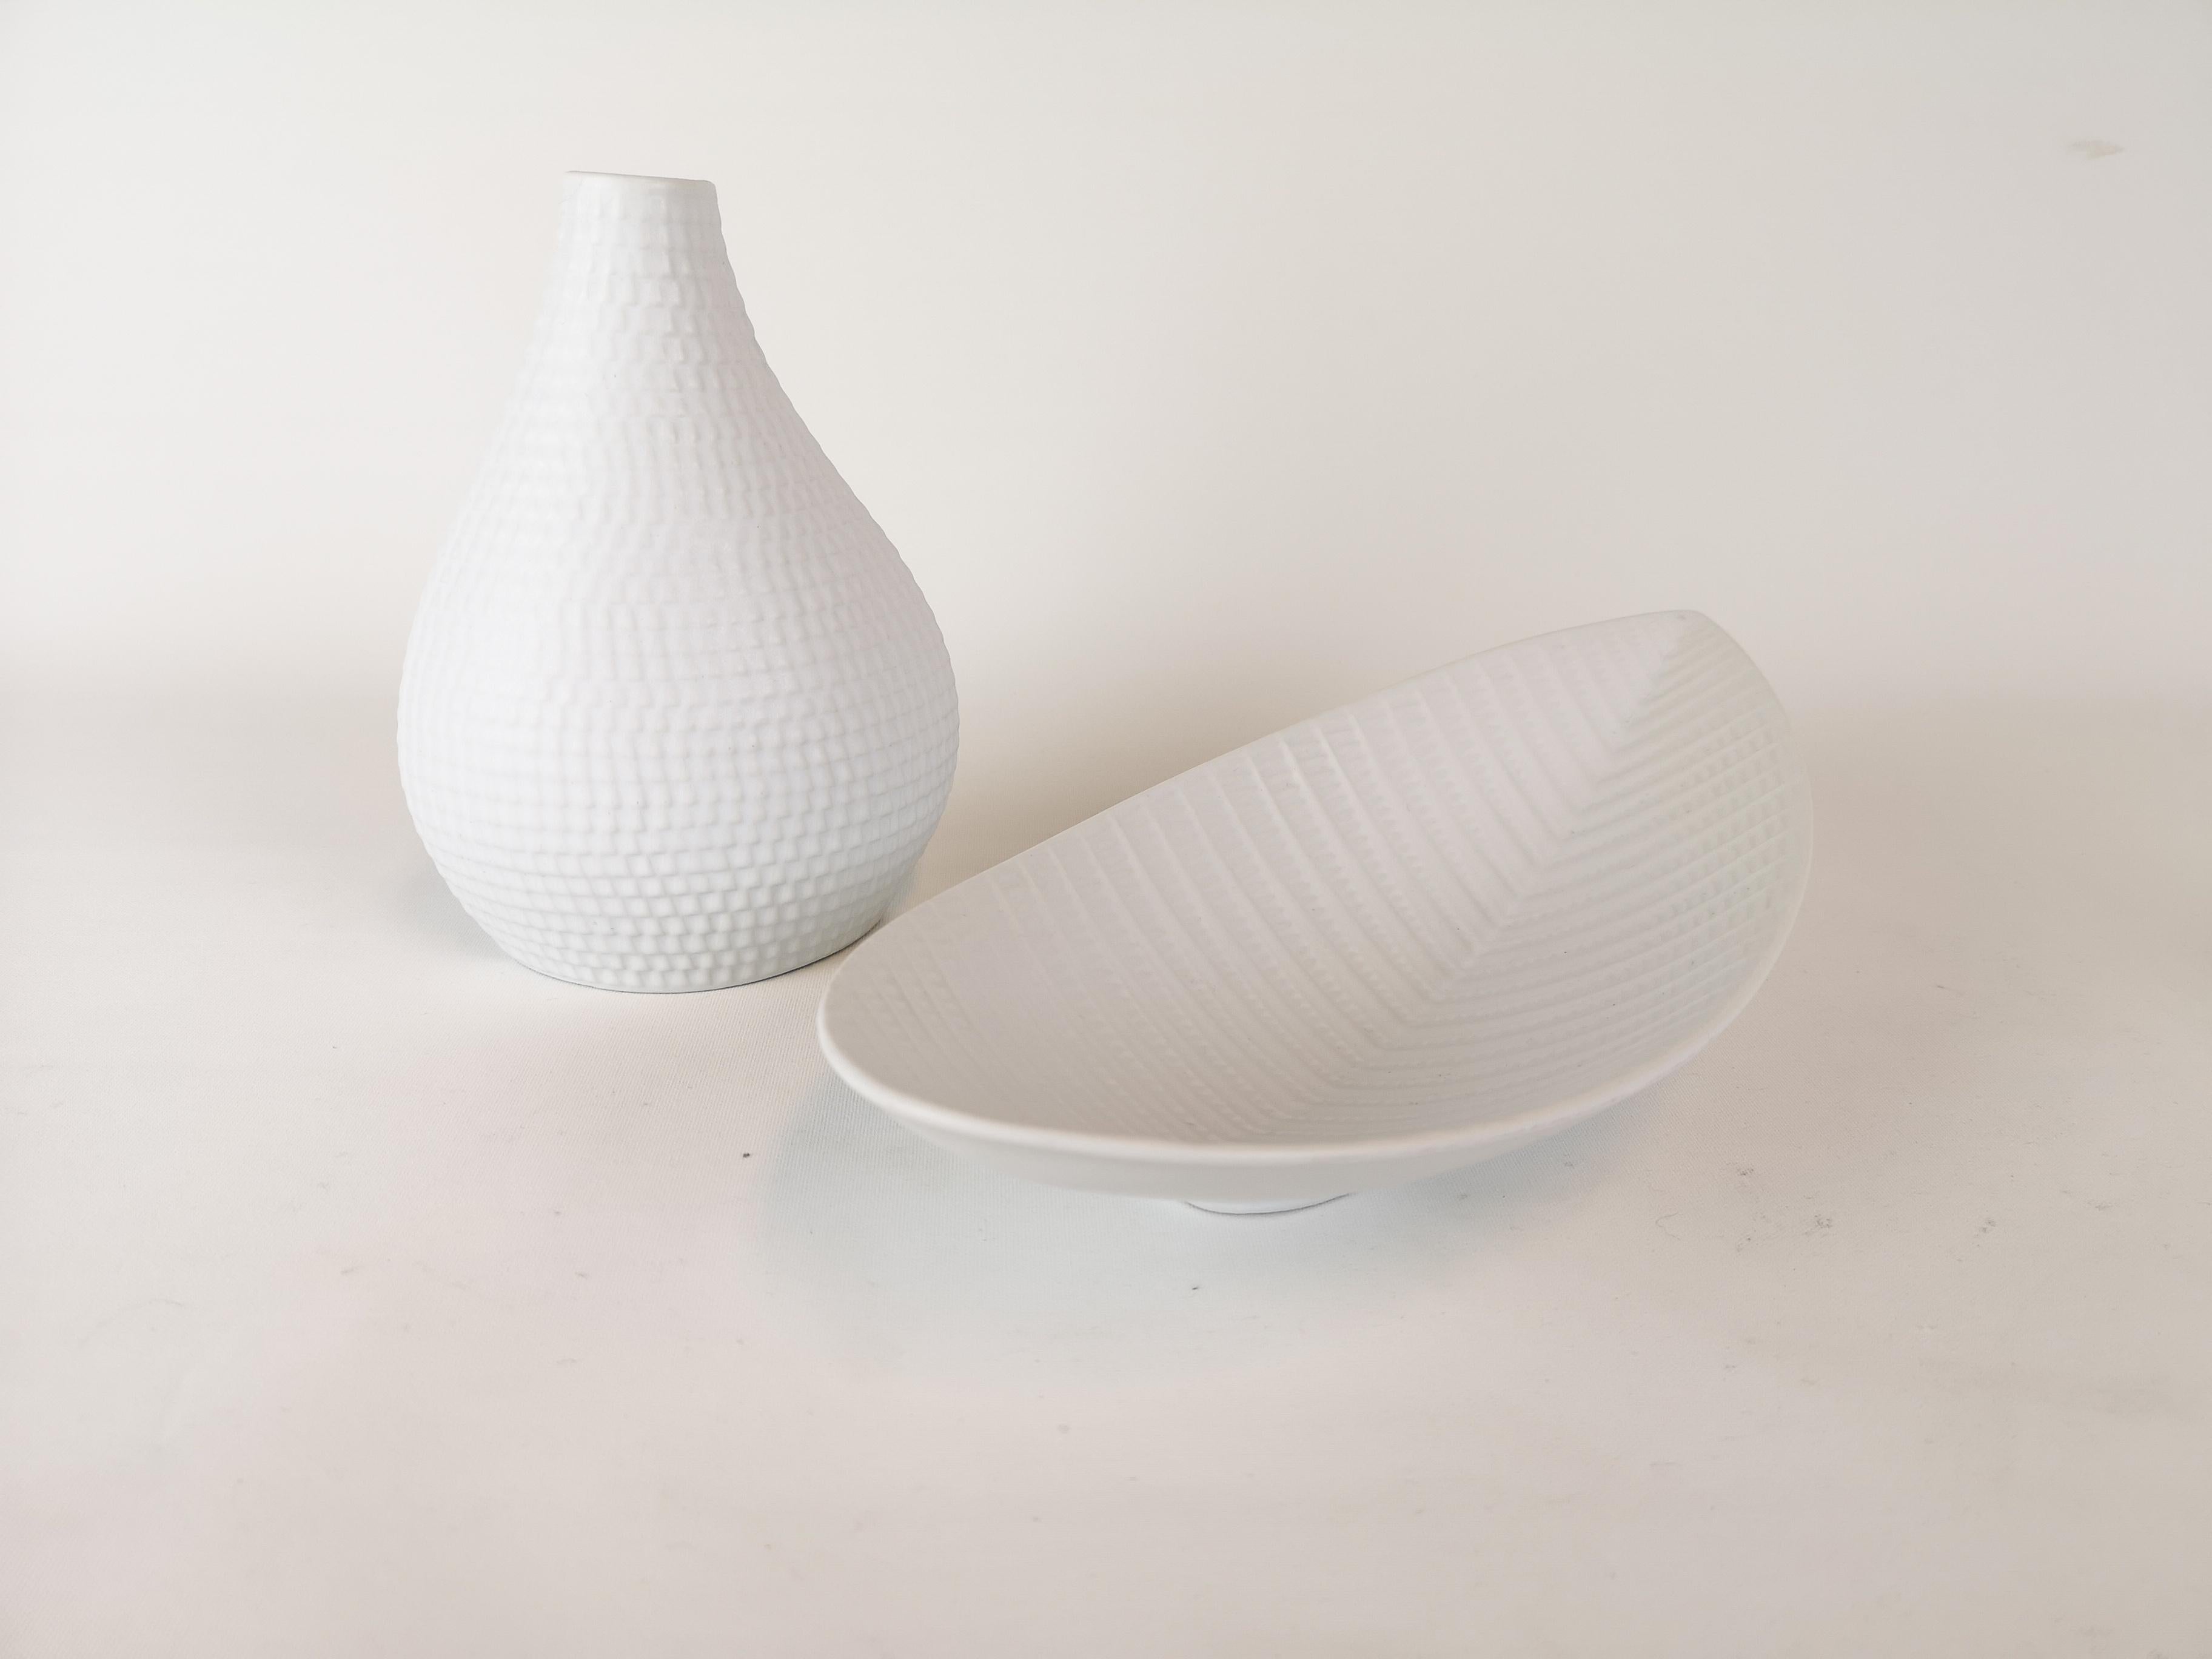 This set of 2 white glazed vase and bowl was produced in Sweden at Gustavsbergs Porcelain Factory. And they were designed by Stig Lindberg. They were meant to look like the skin from a reptile.

Good condition.

Dimensions: The vase H 19 W 14 D 8 cm